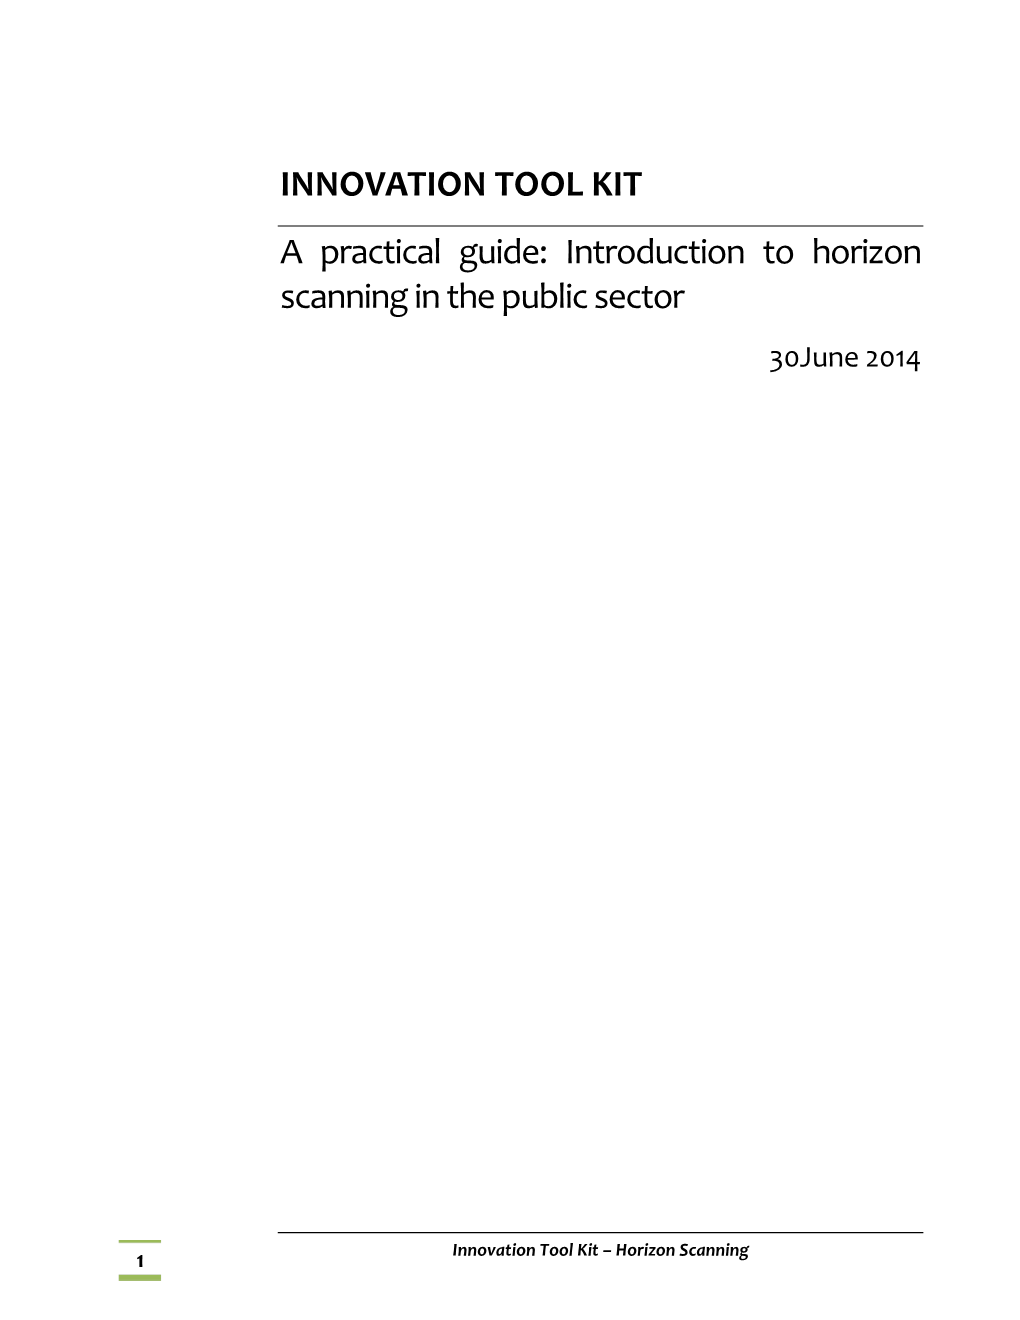 Introduction to Horizon Scanning in the Public Sector 30June 2014